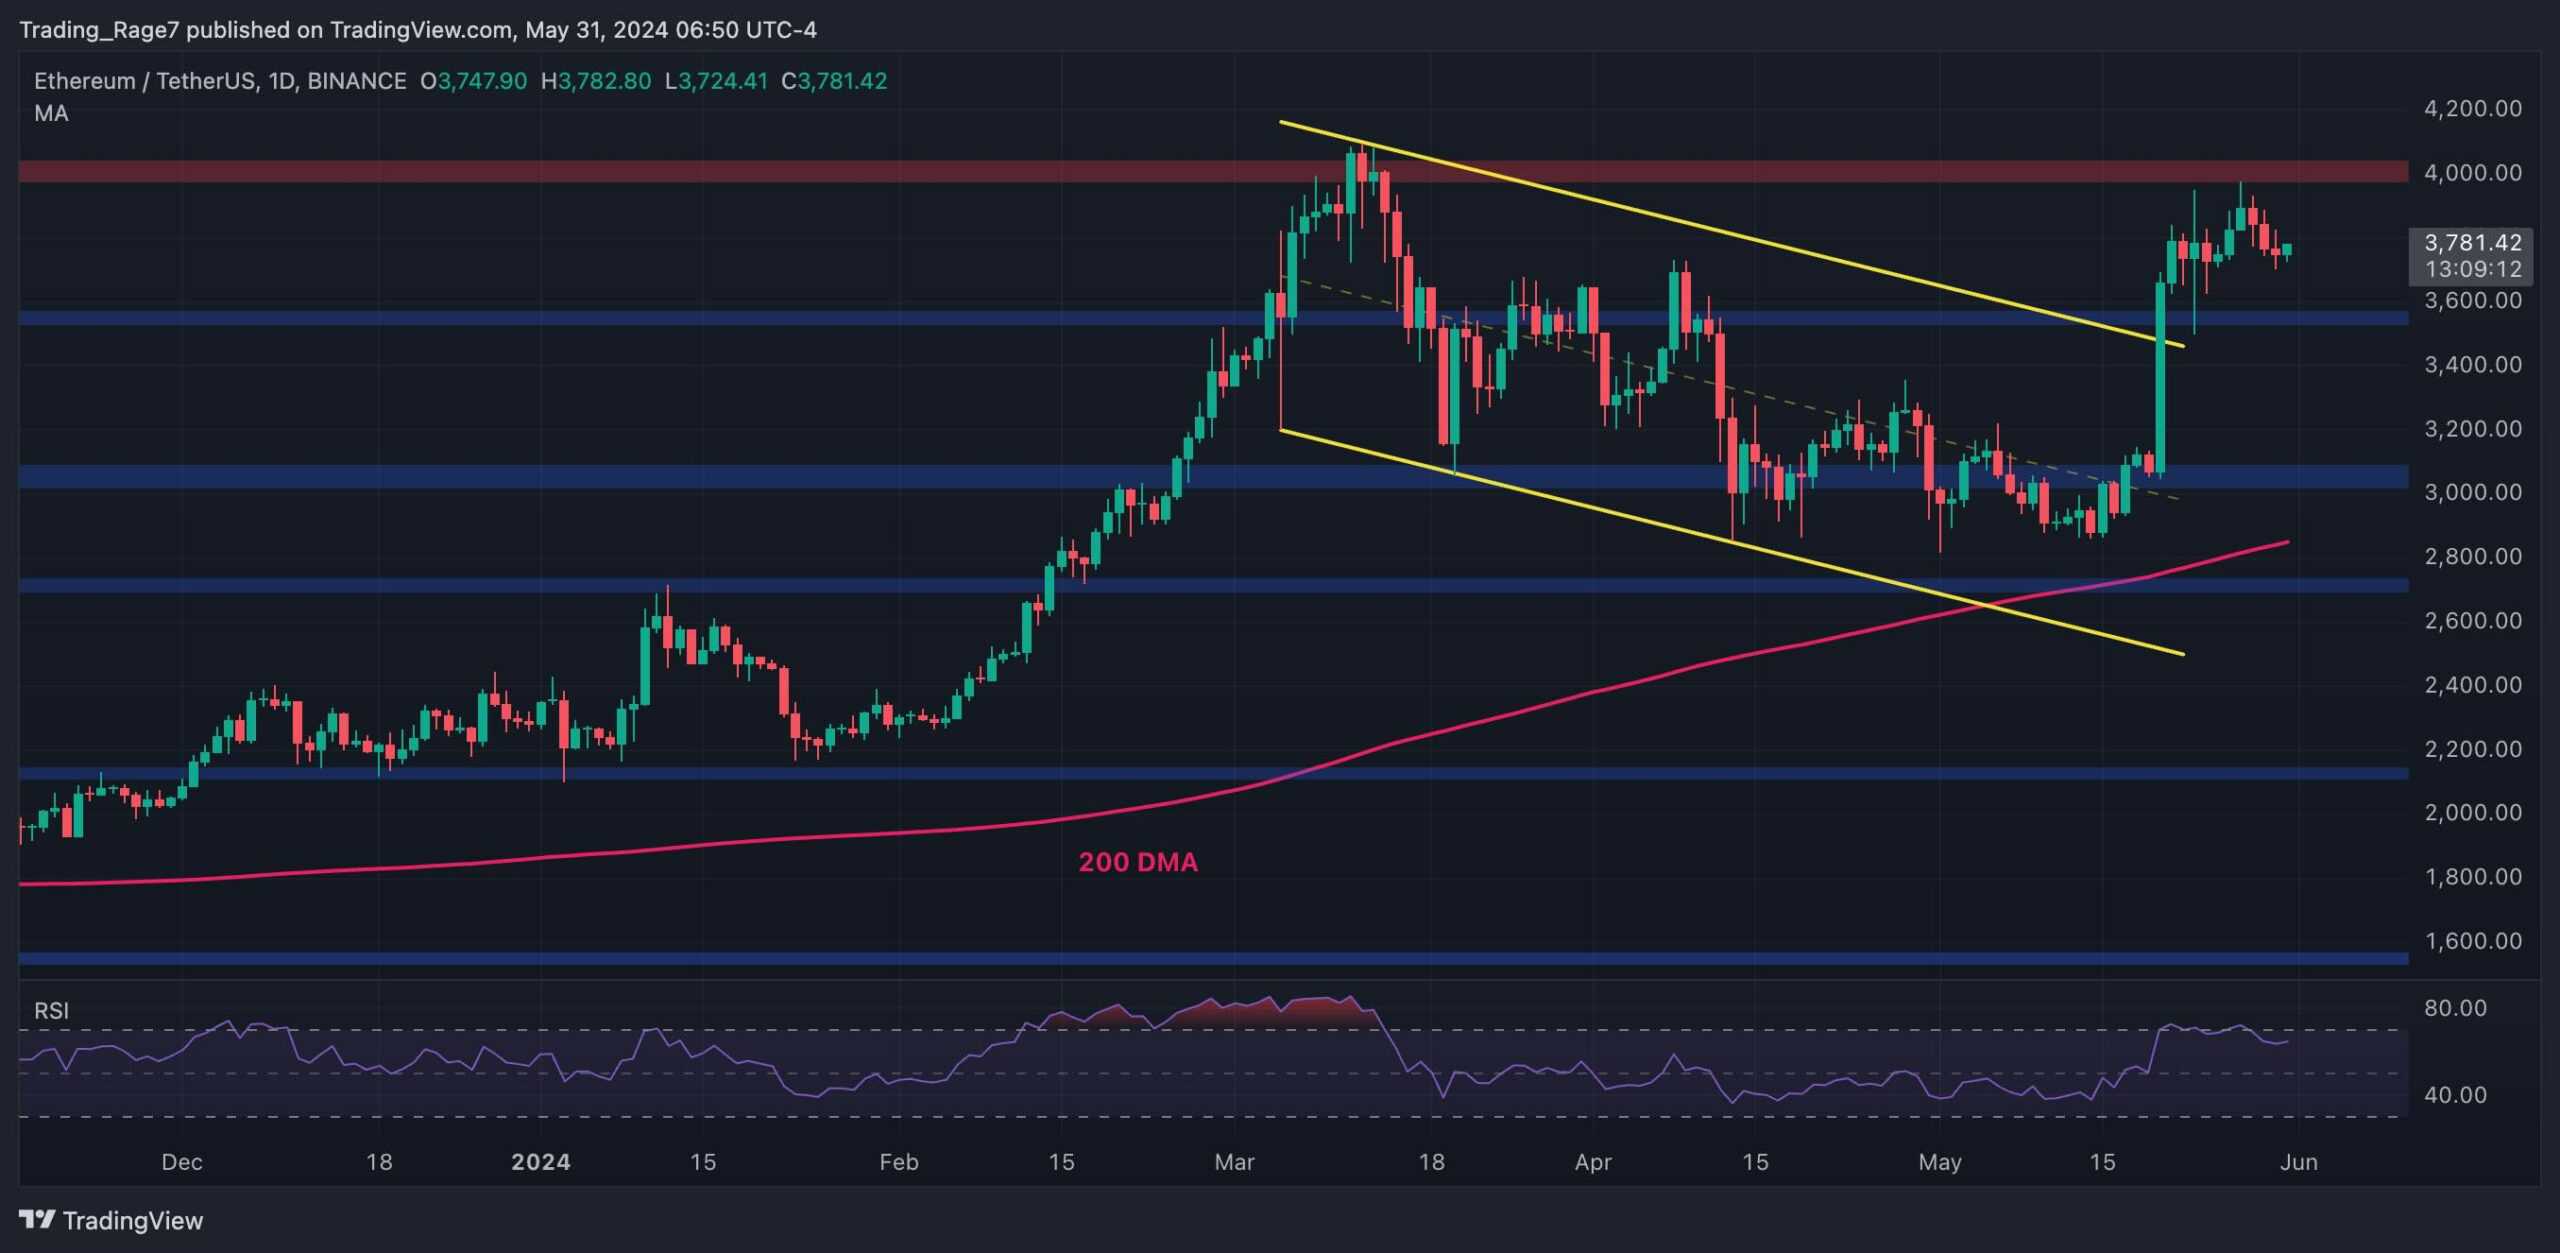 Is-eth-primed-to-take-down-the-$4k-resistance-and-chart-new-all-time-high?-(ethereum-price-analysis)